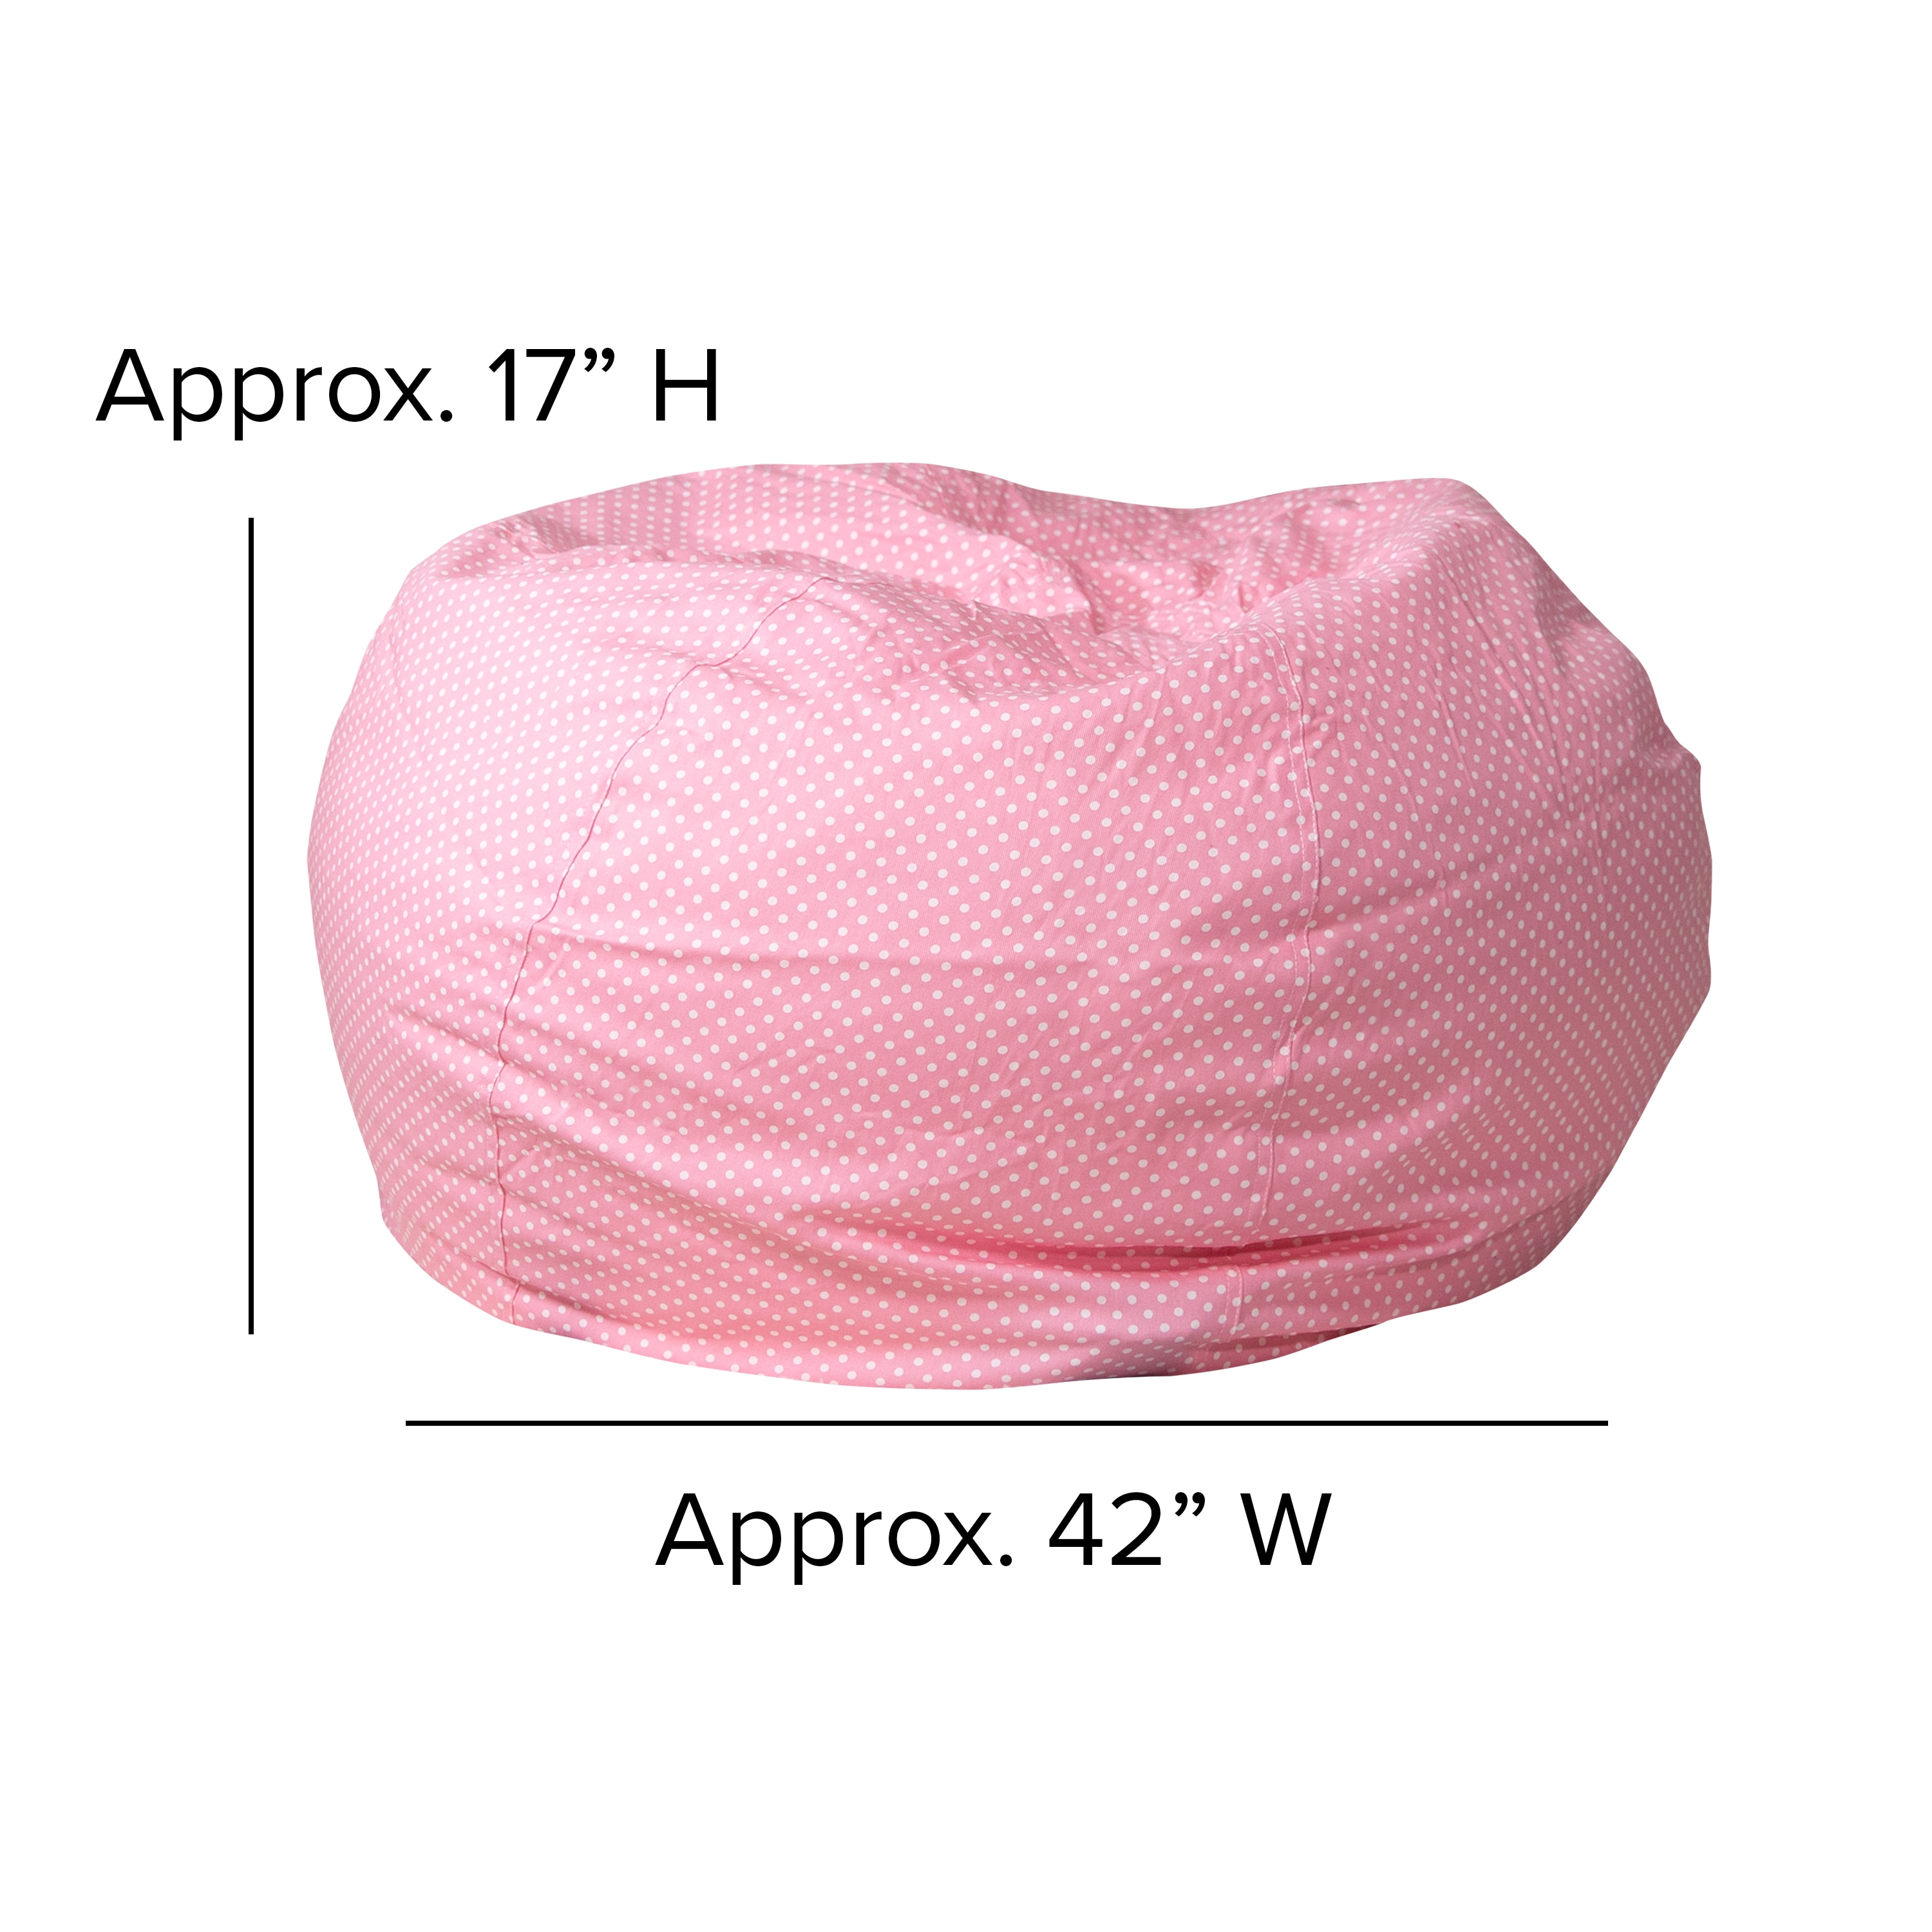 Flash Furniture Kids Bean Bag Chair Small, Solid Light Pink